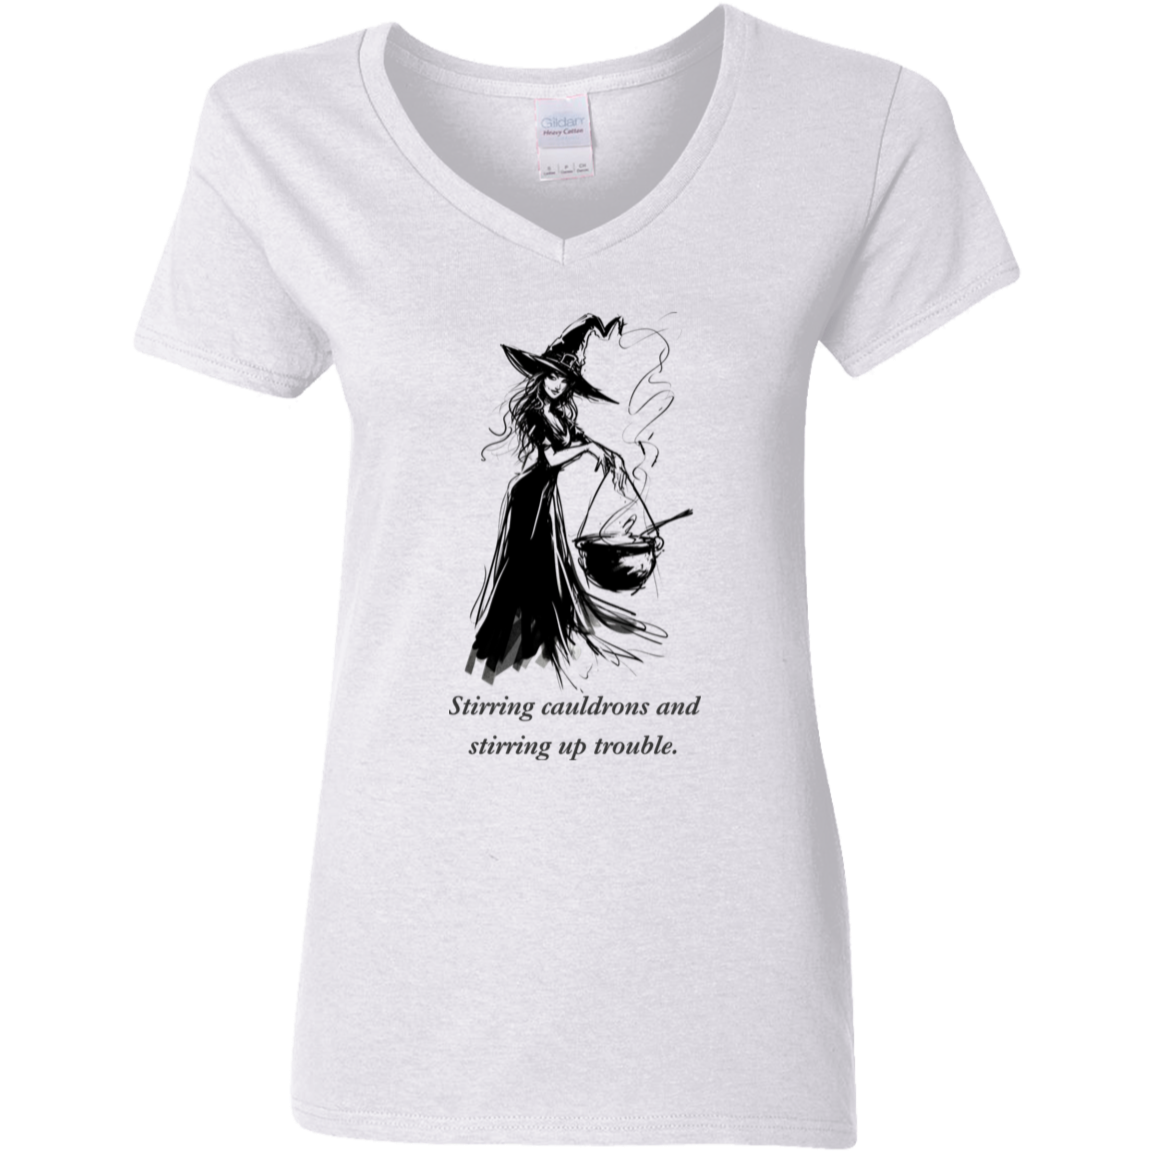 Stirring cauldrons and stirring up trouble. Women's white graphic T shirt  from BLK Moon Shop